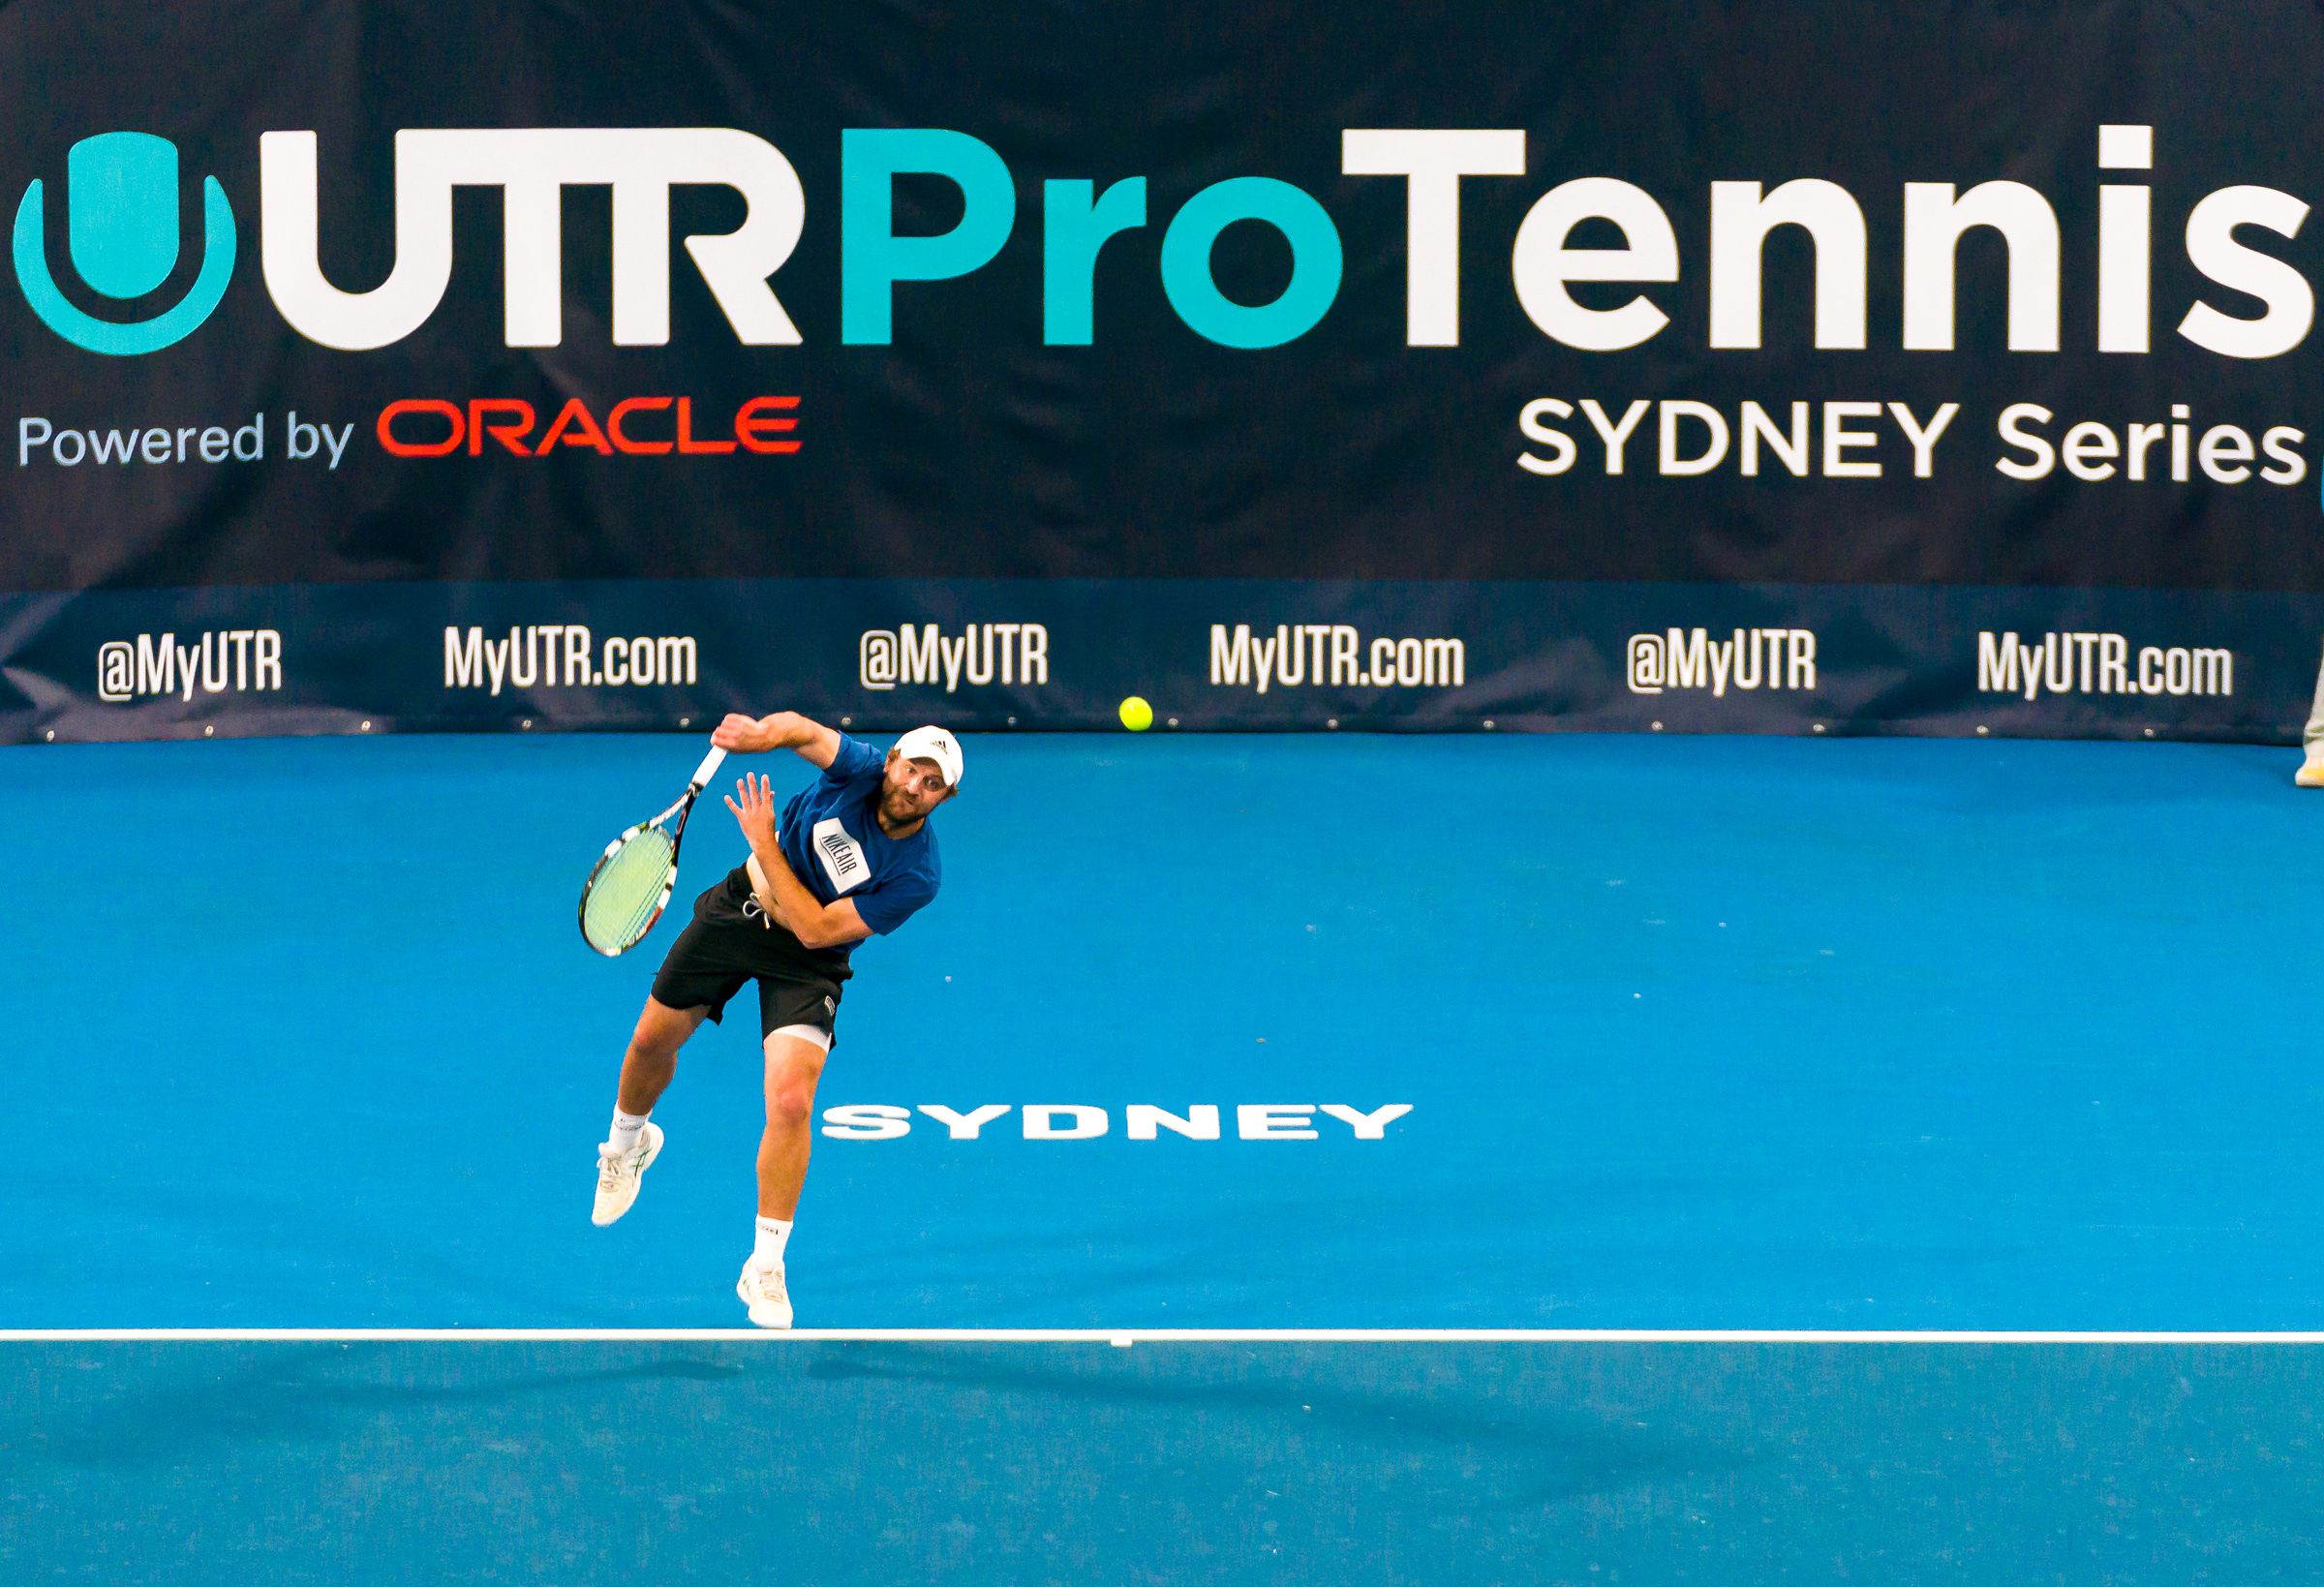 Professional Tennis to return to Sydney today for the second UTR Pro Series event 8 July, 2020 Tennis NSW